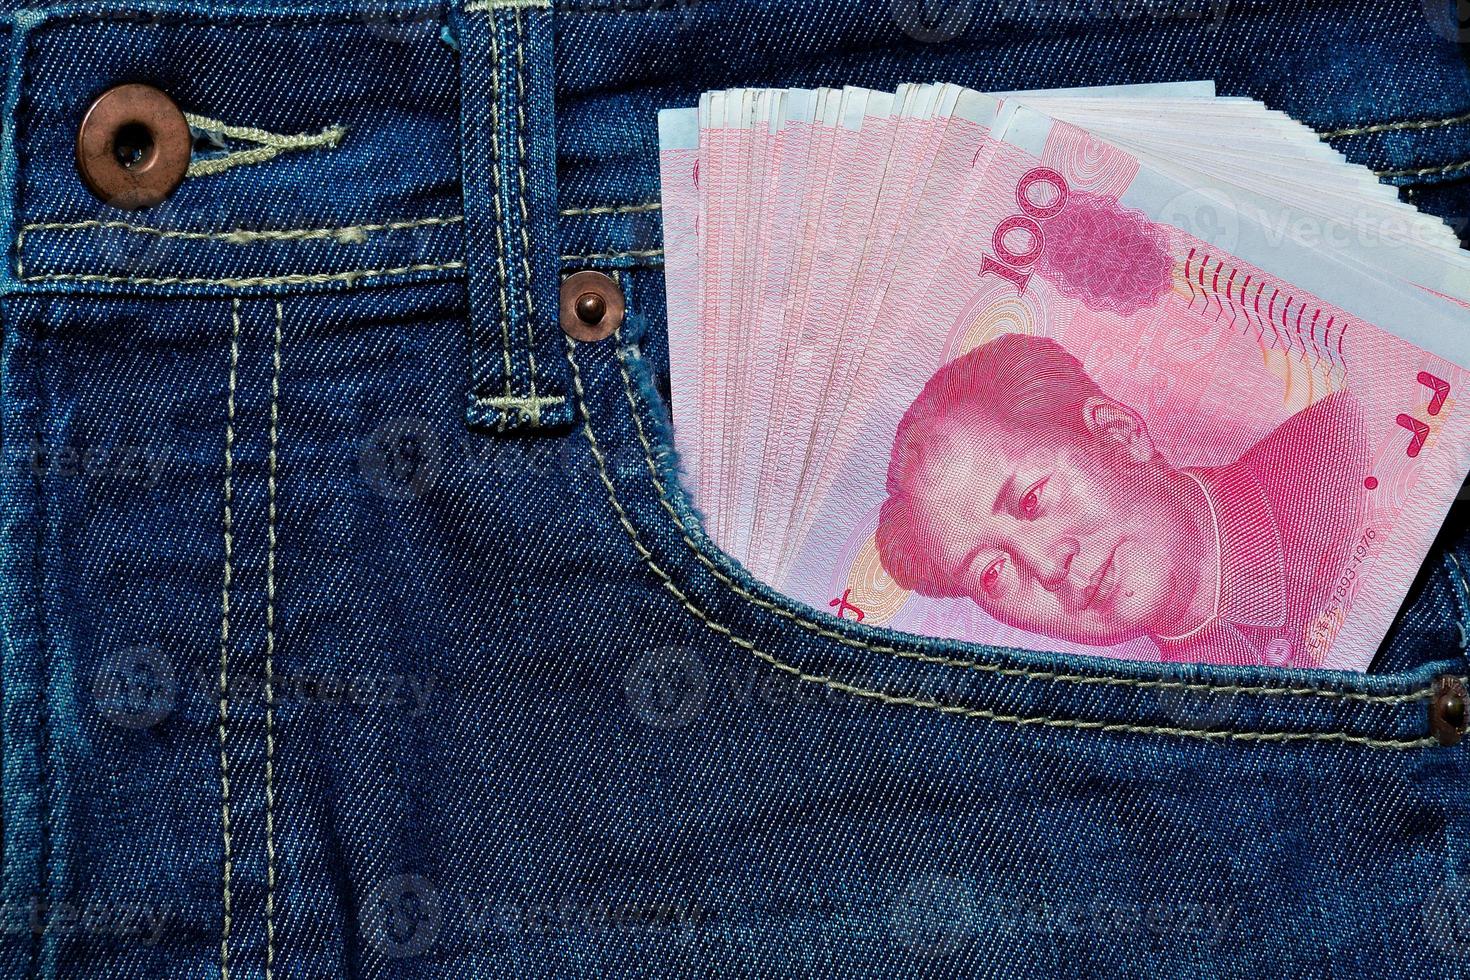 Yuan or RMB in Jean's pocket, Chinese Currency photo